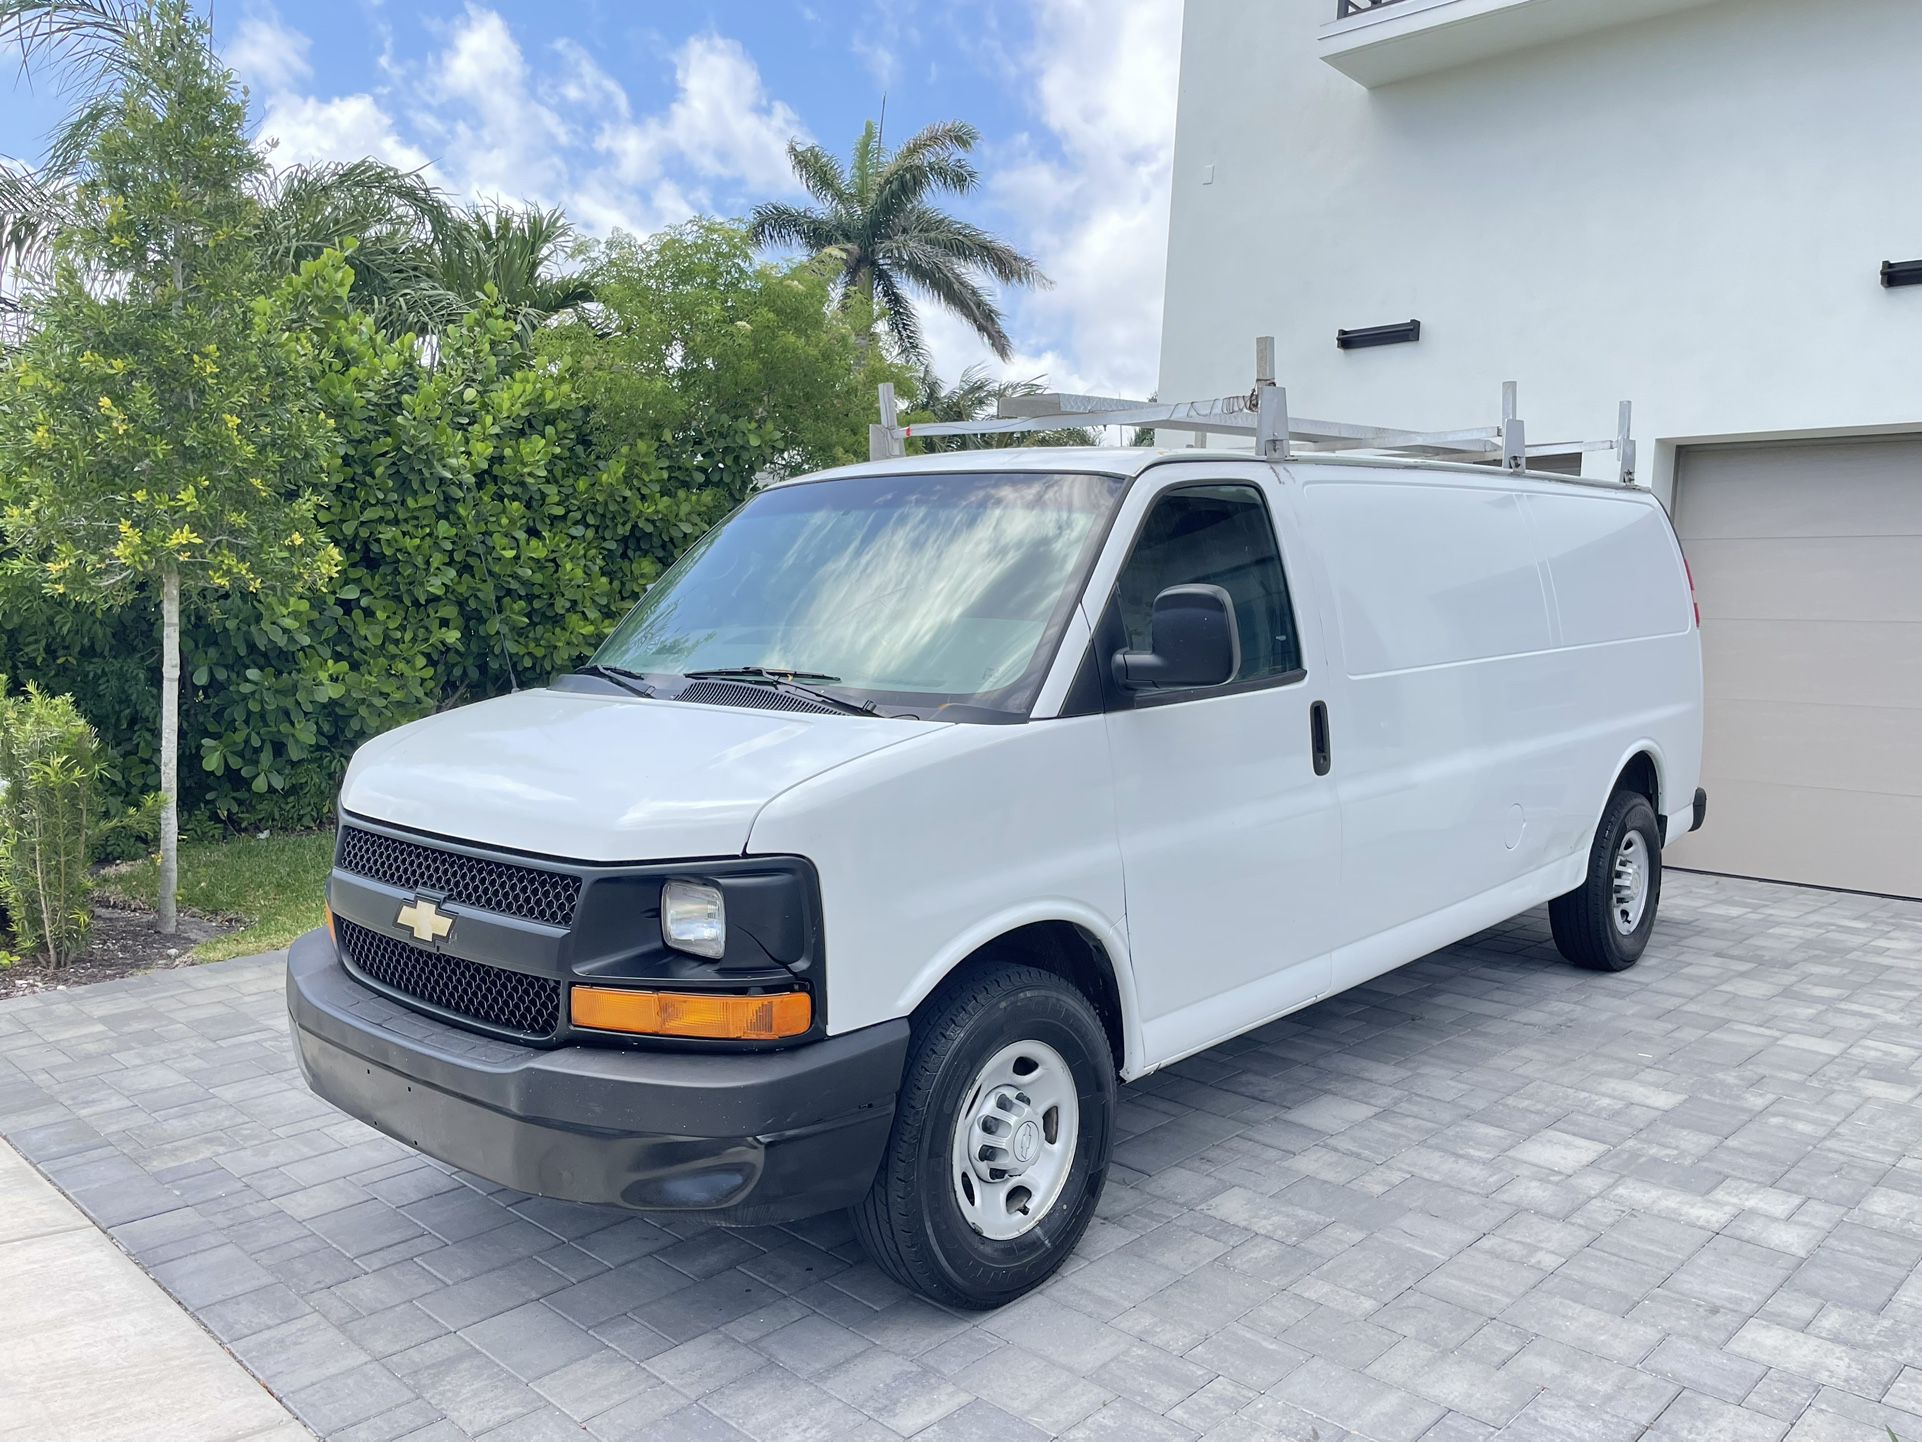 2015 Chevy 2500 Express Cargo Van Extended